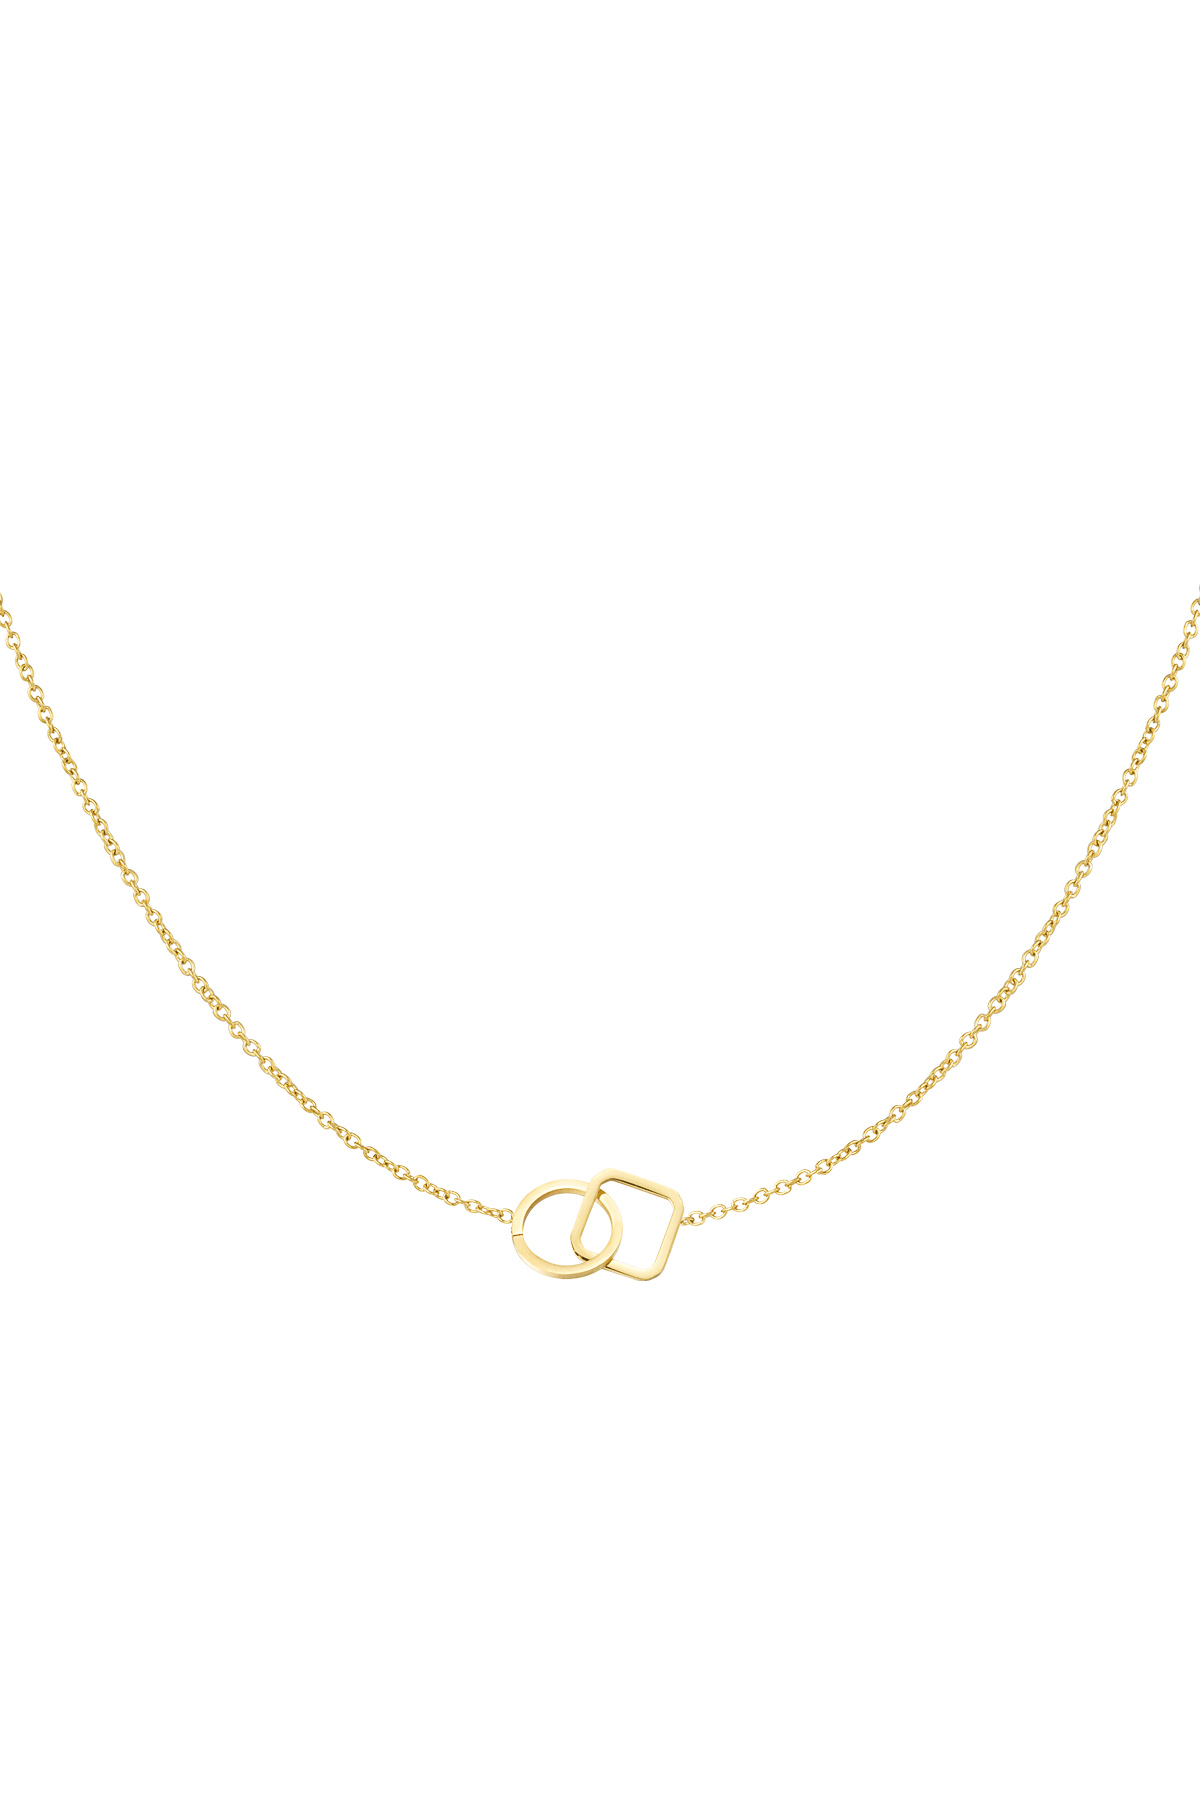 Chain connected square &amp; round - gold